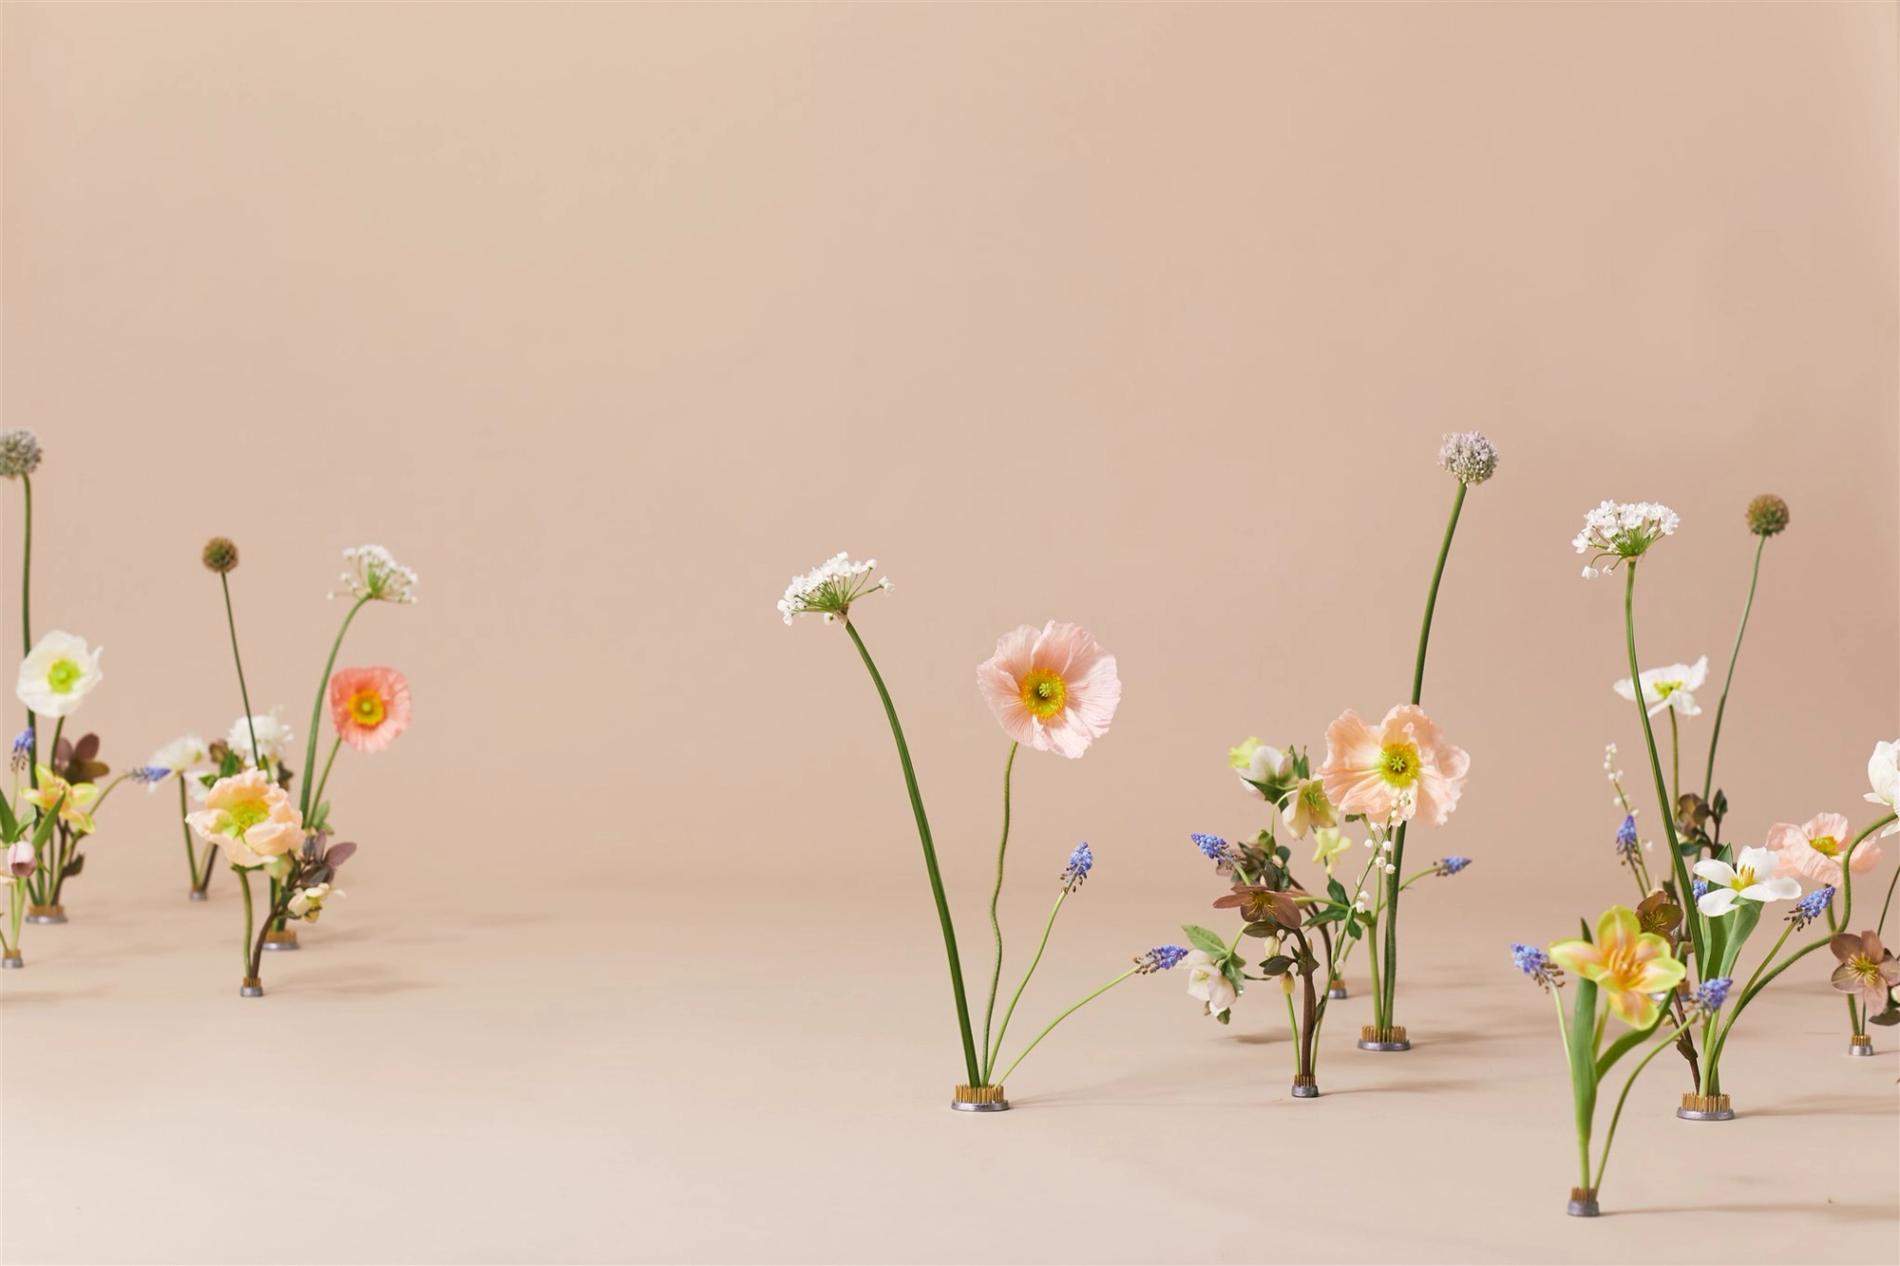 Minimalist arrangements of three to four flowers on tall stems inside of tiny stands grouped in front of a peach-beige background